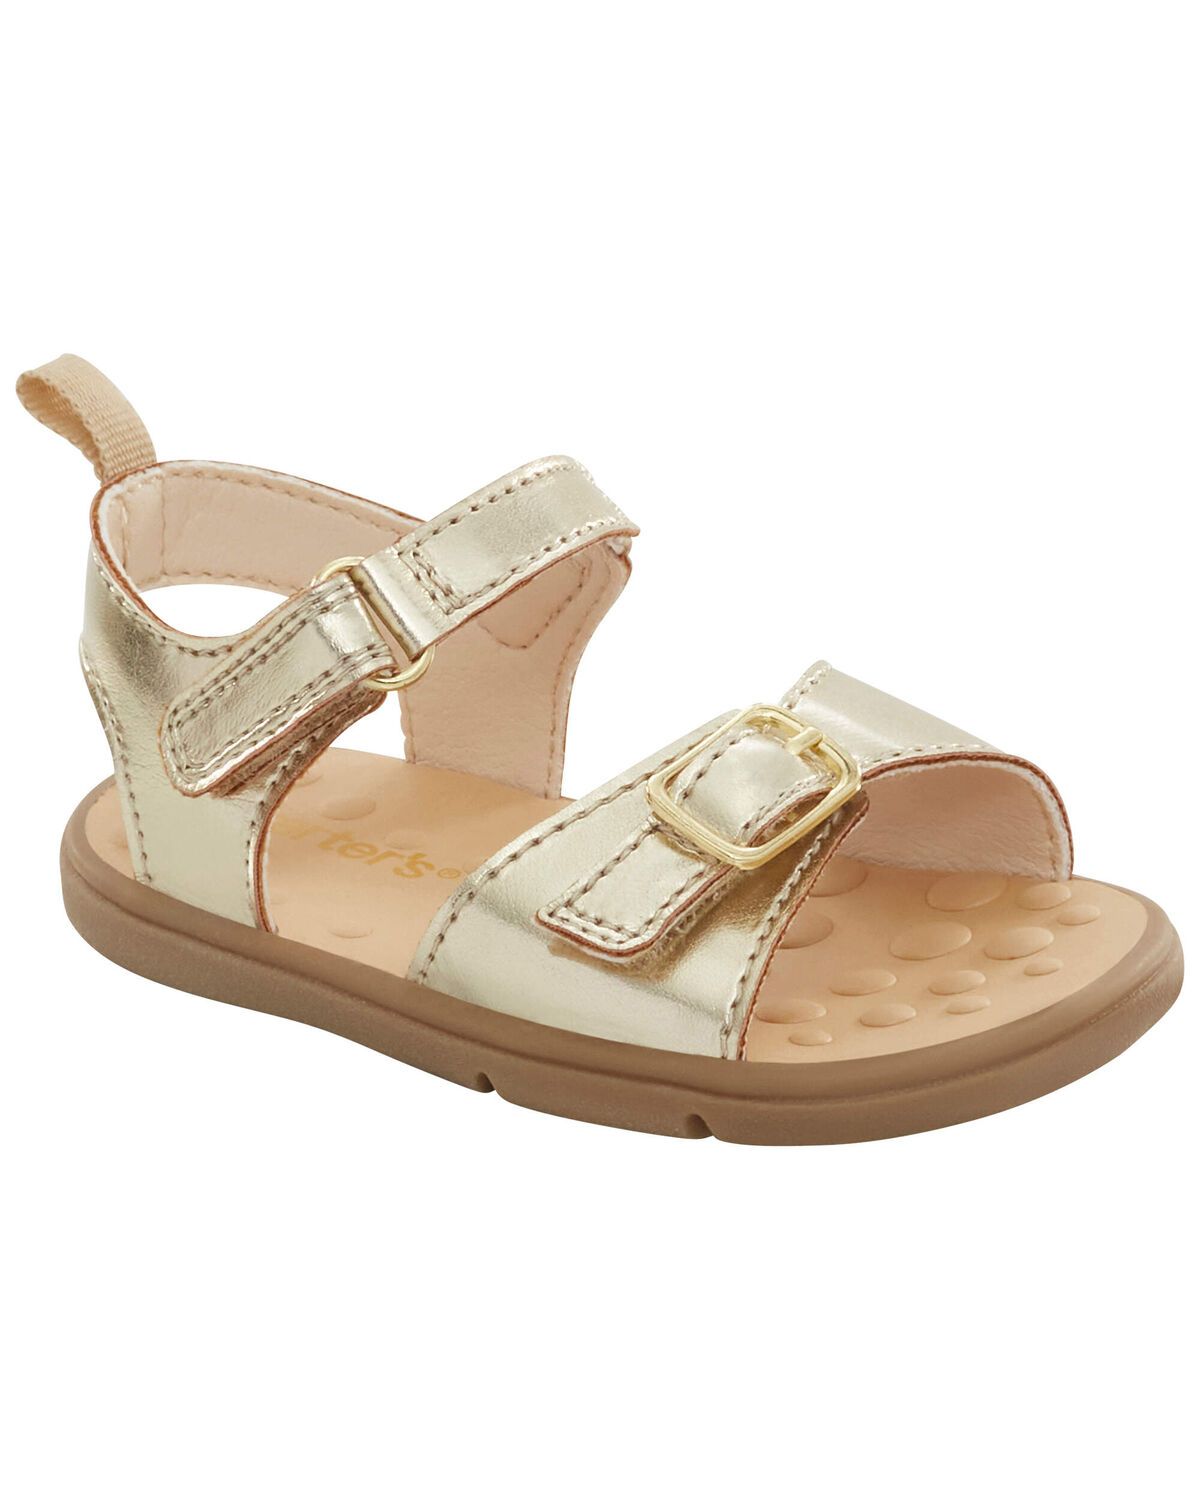 Baby Every Step® Gold Sandals | Carter's